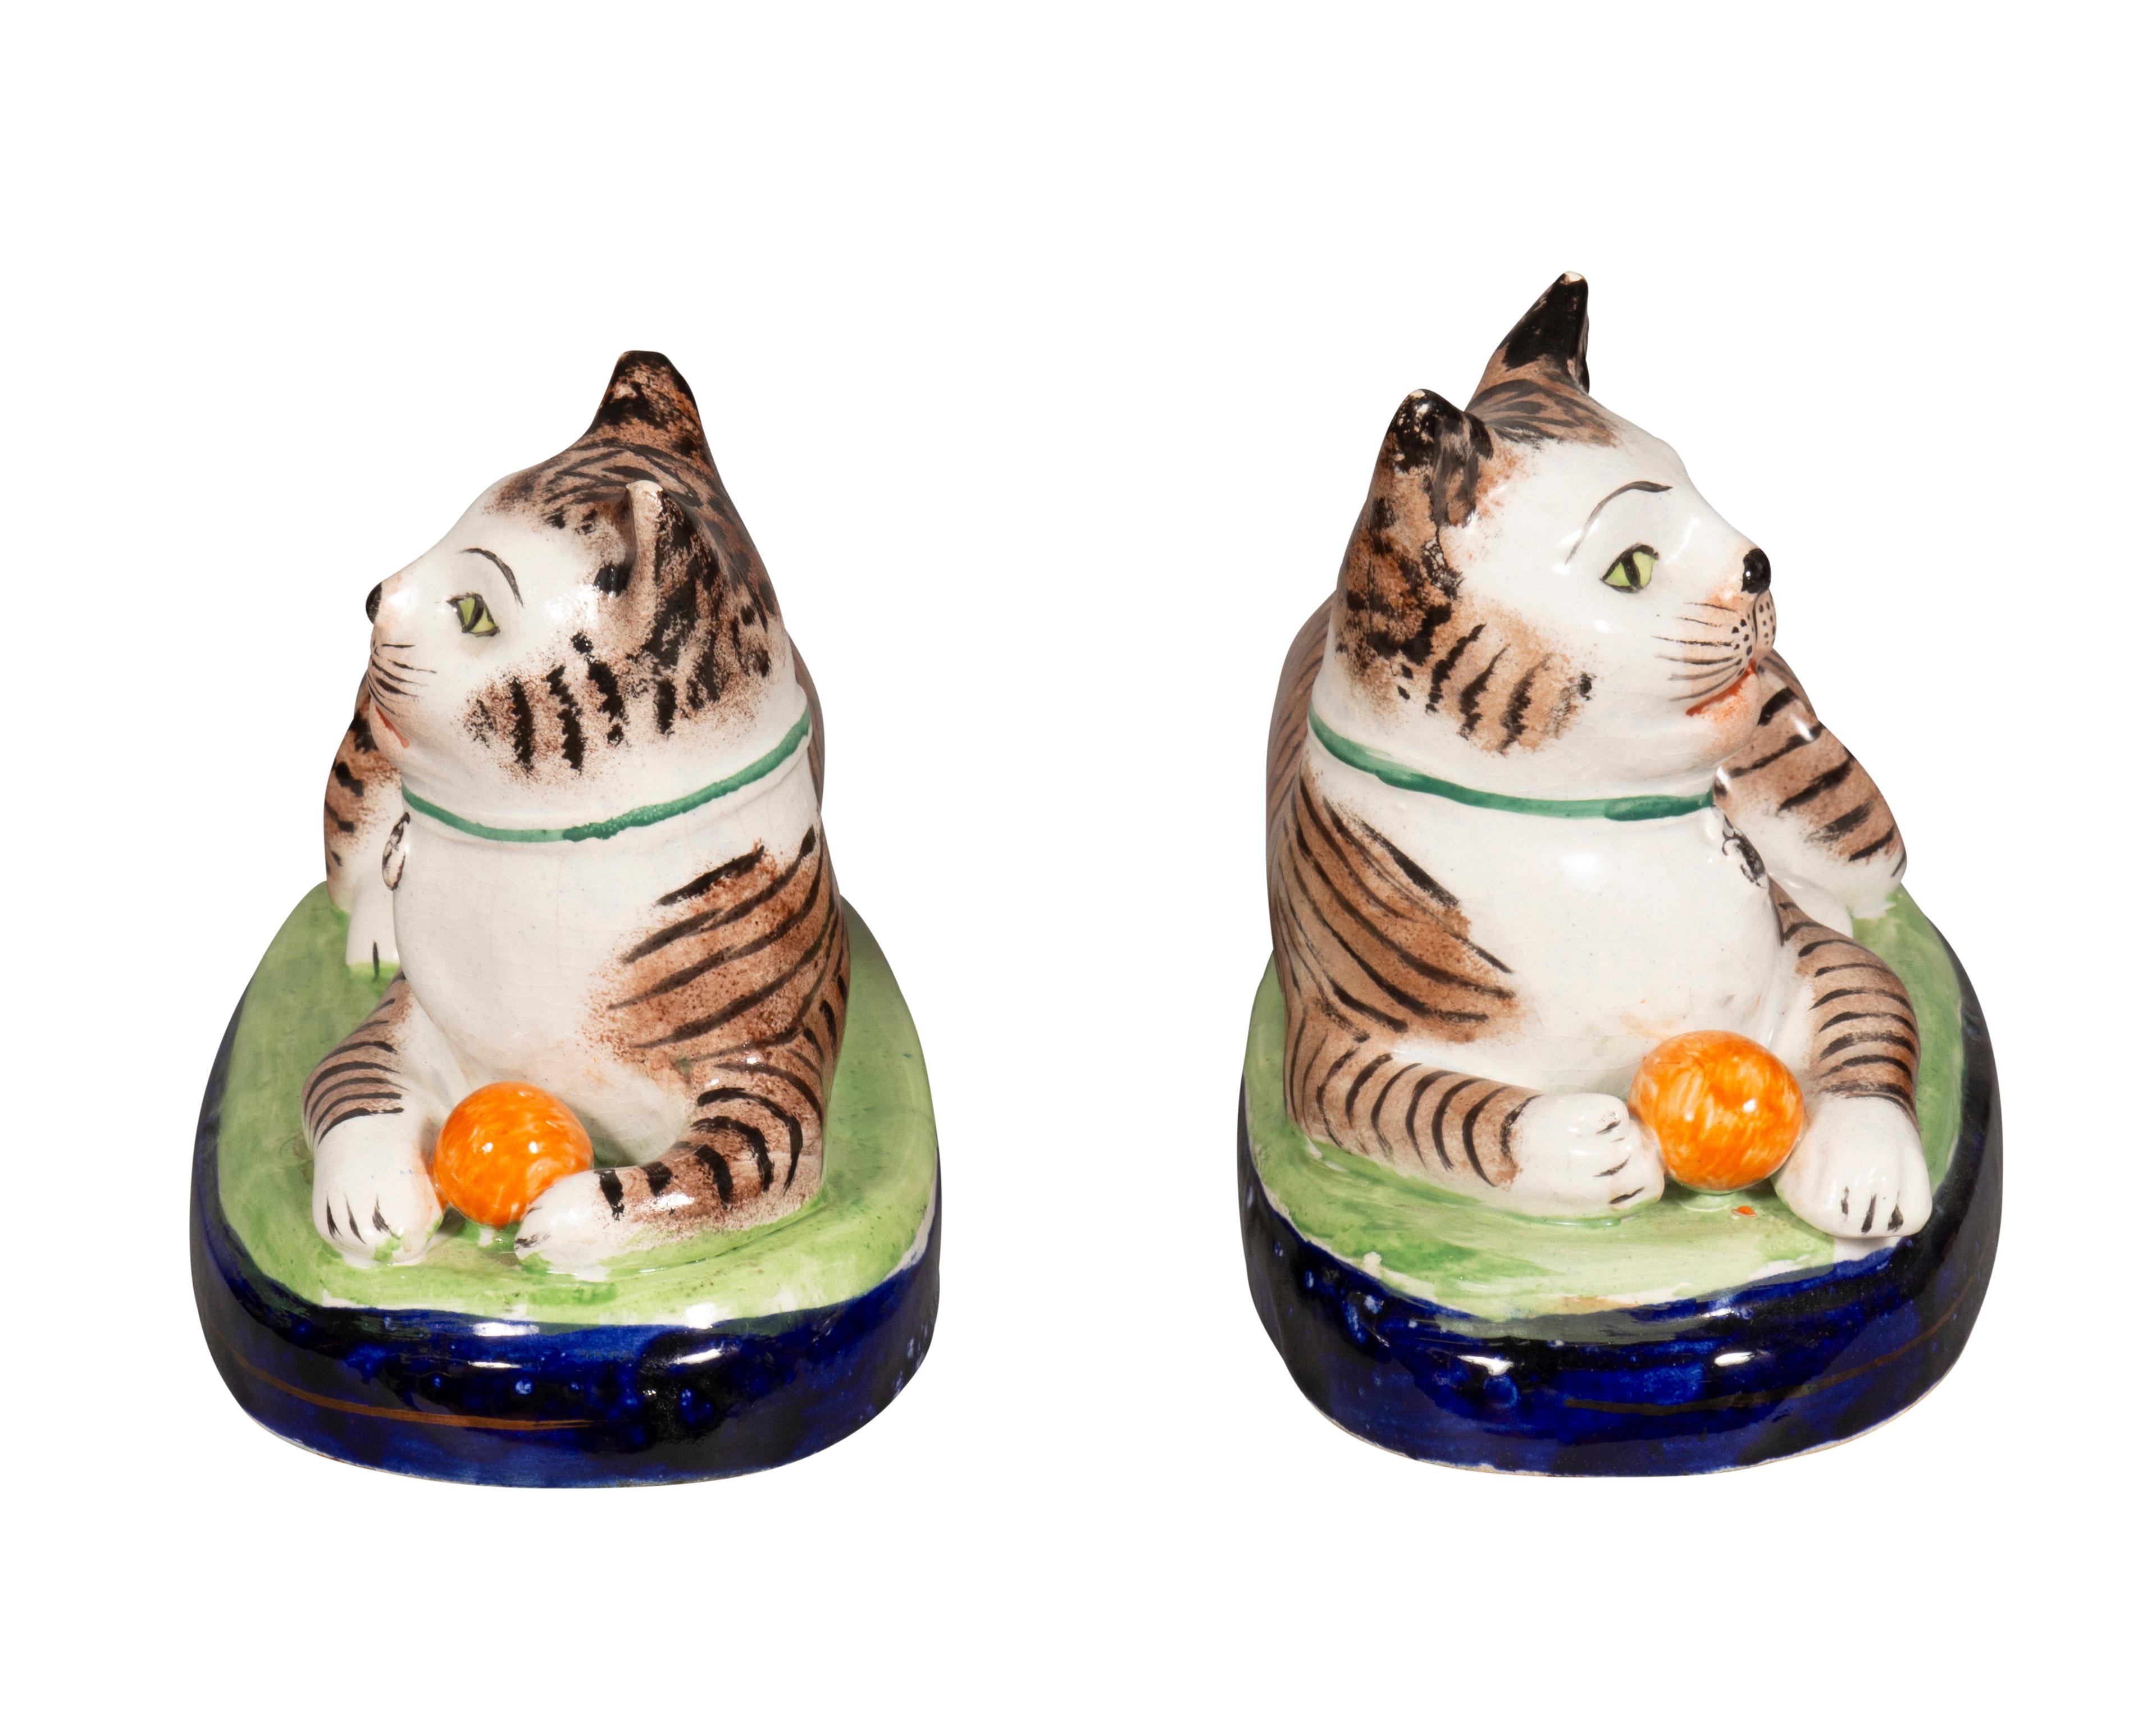 Each cat reclining with a ball between their feet. Nicely painted. Old price tag of 3,500.